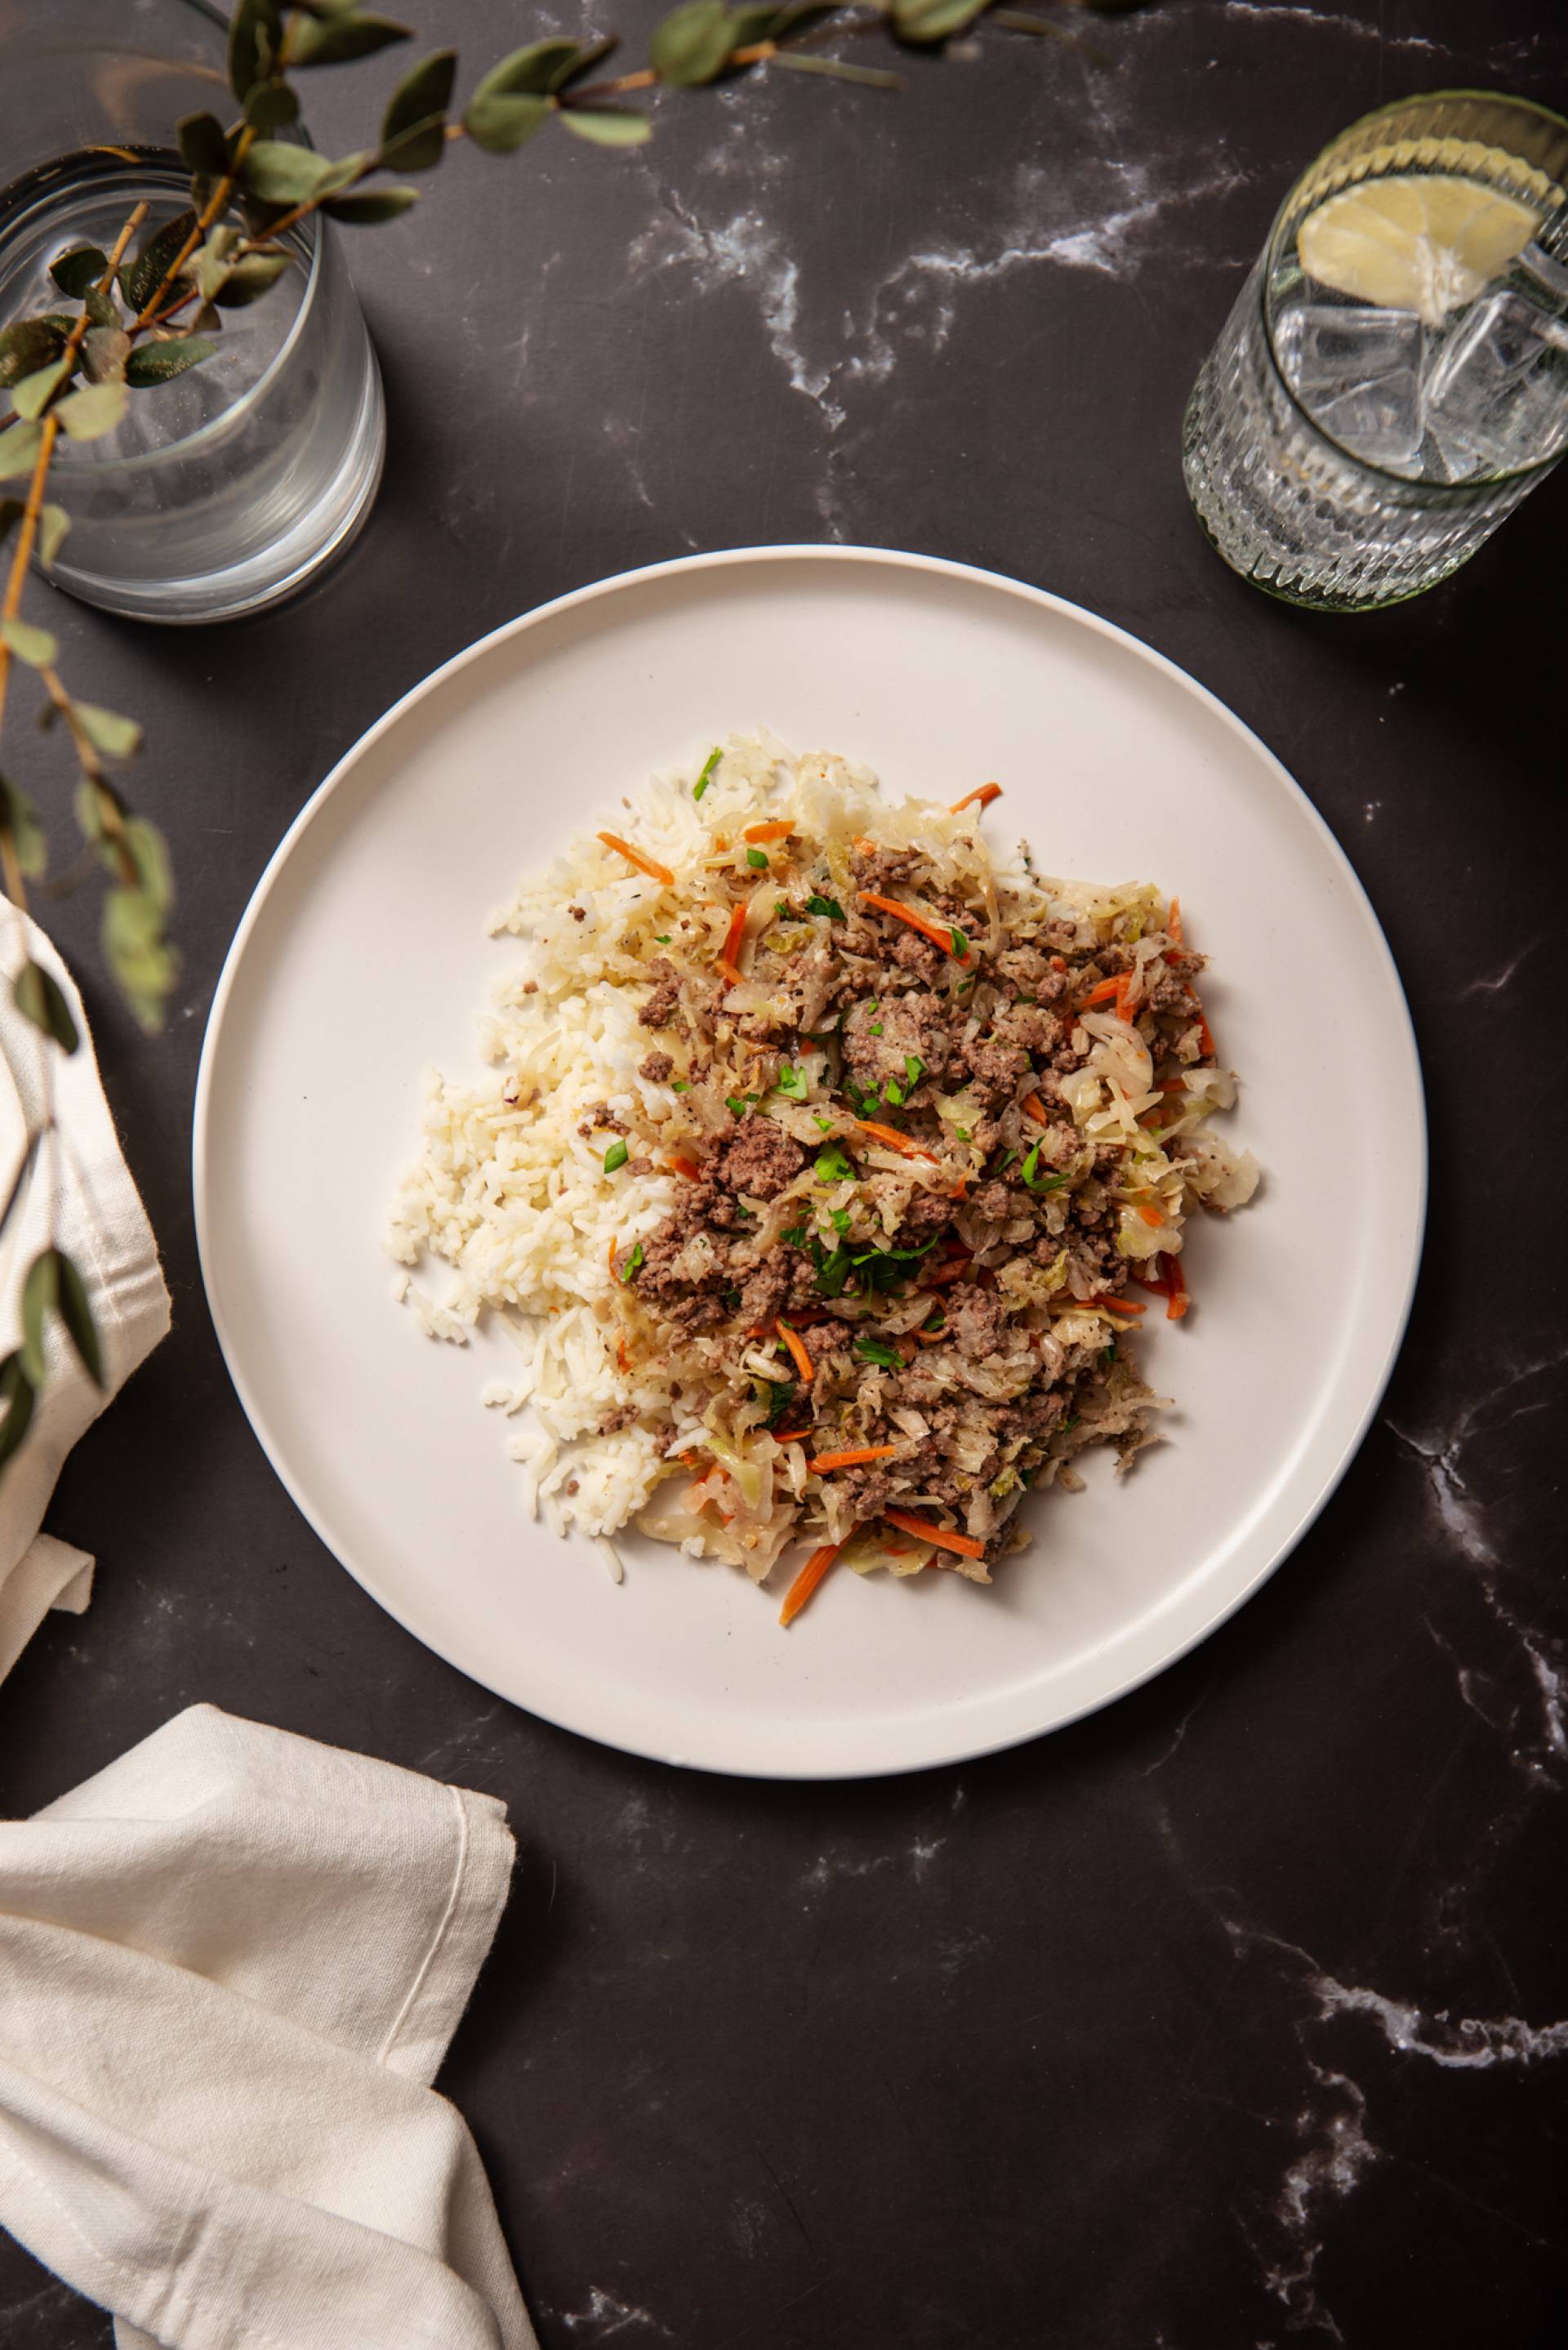 FITNESS: Beef & Cabbage Stir-Fry